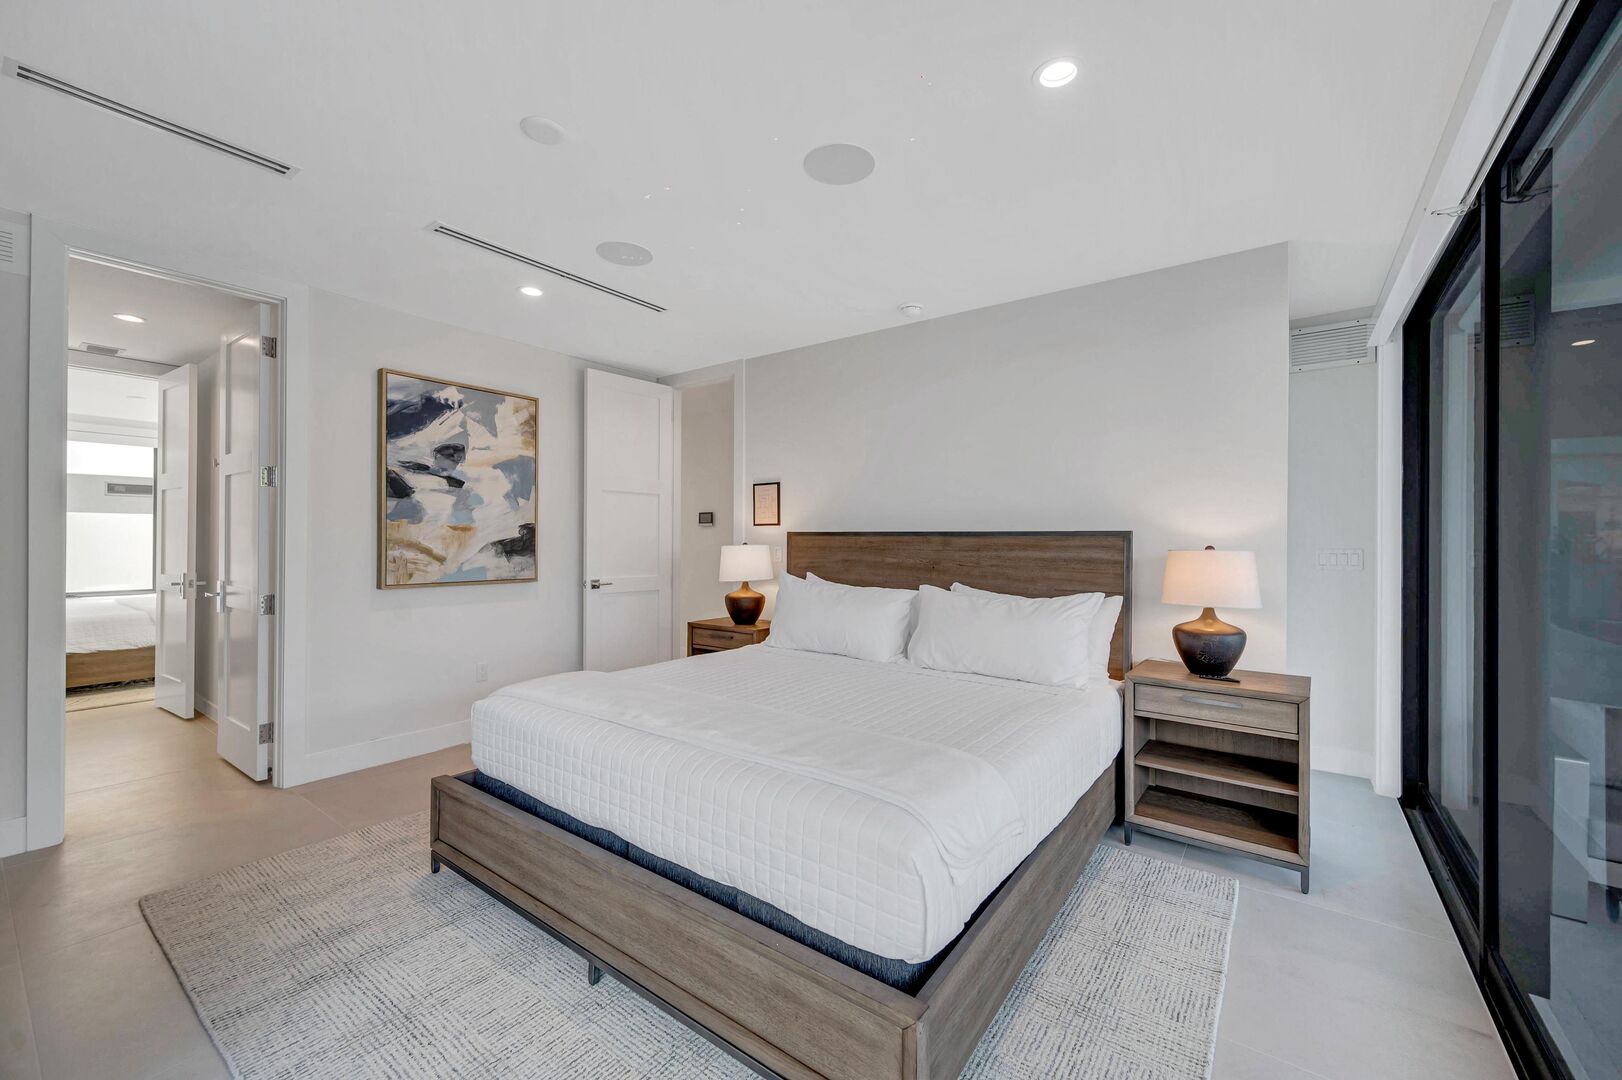 Bedroom Five is located on the first floor with direct pool access and a wet bar. The bedroom features a king size bed, a jack-and-jill bathroom with bedroom five.